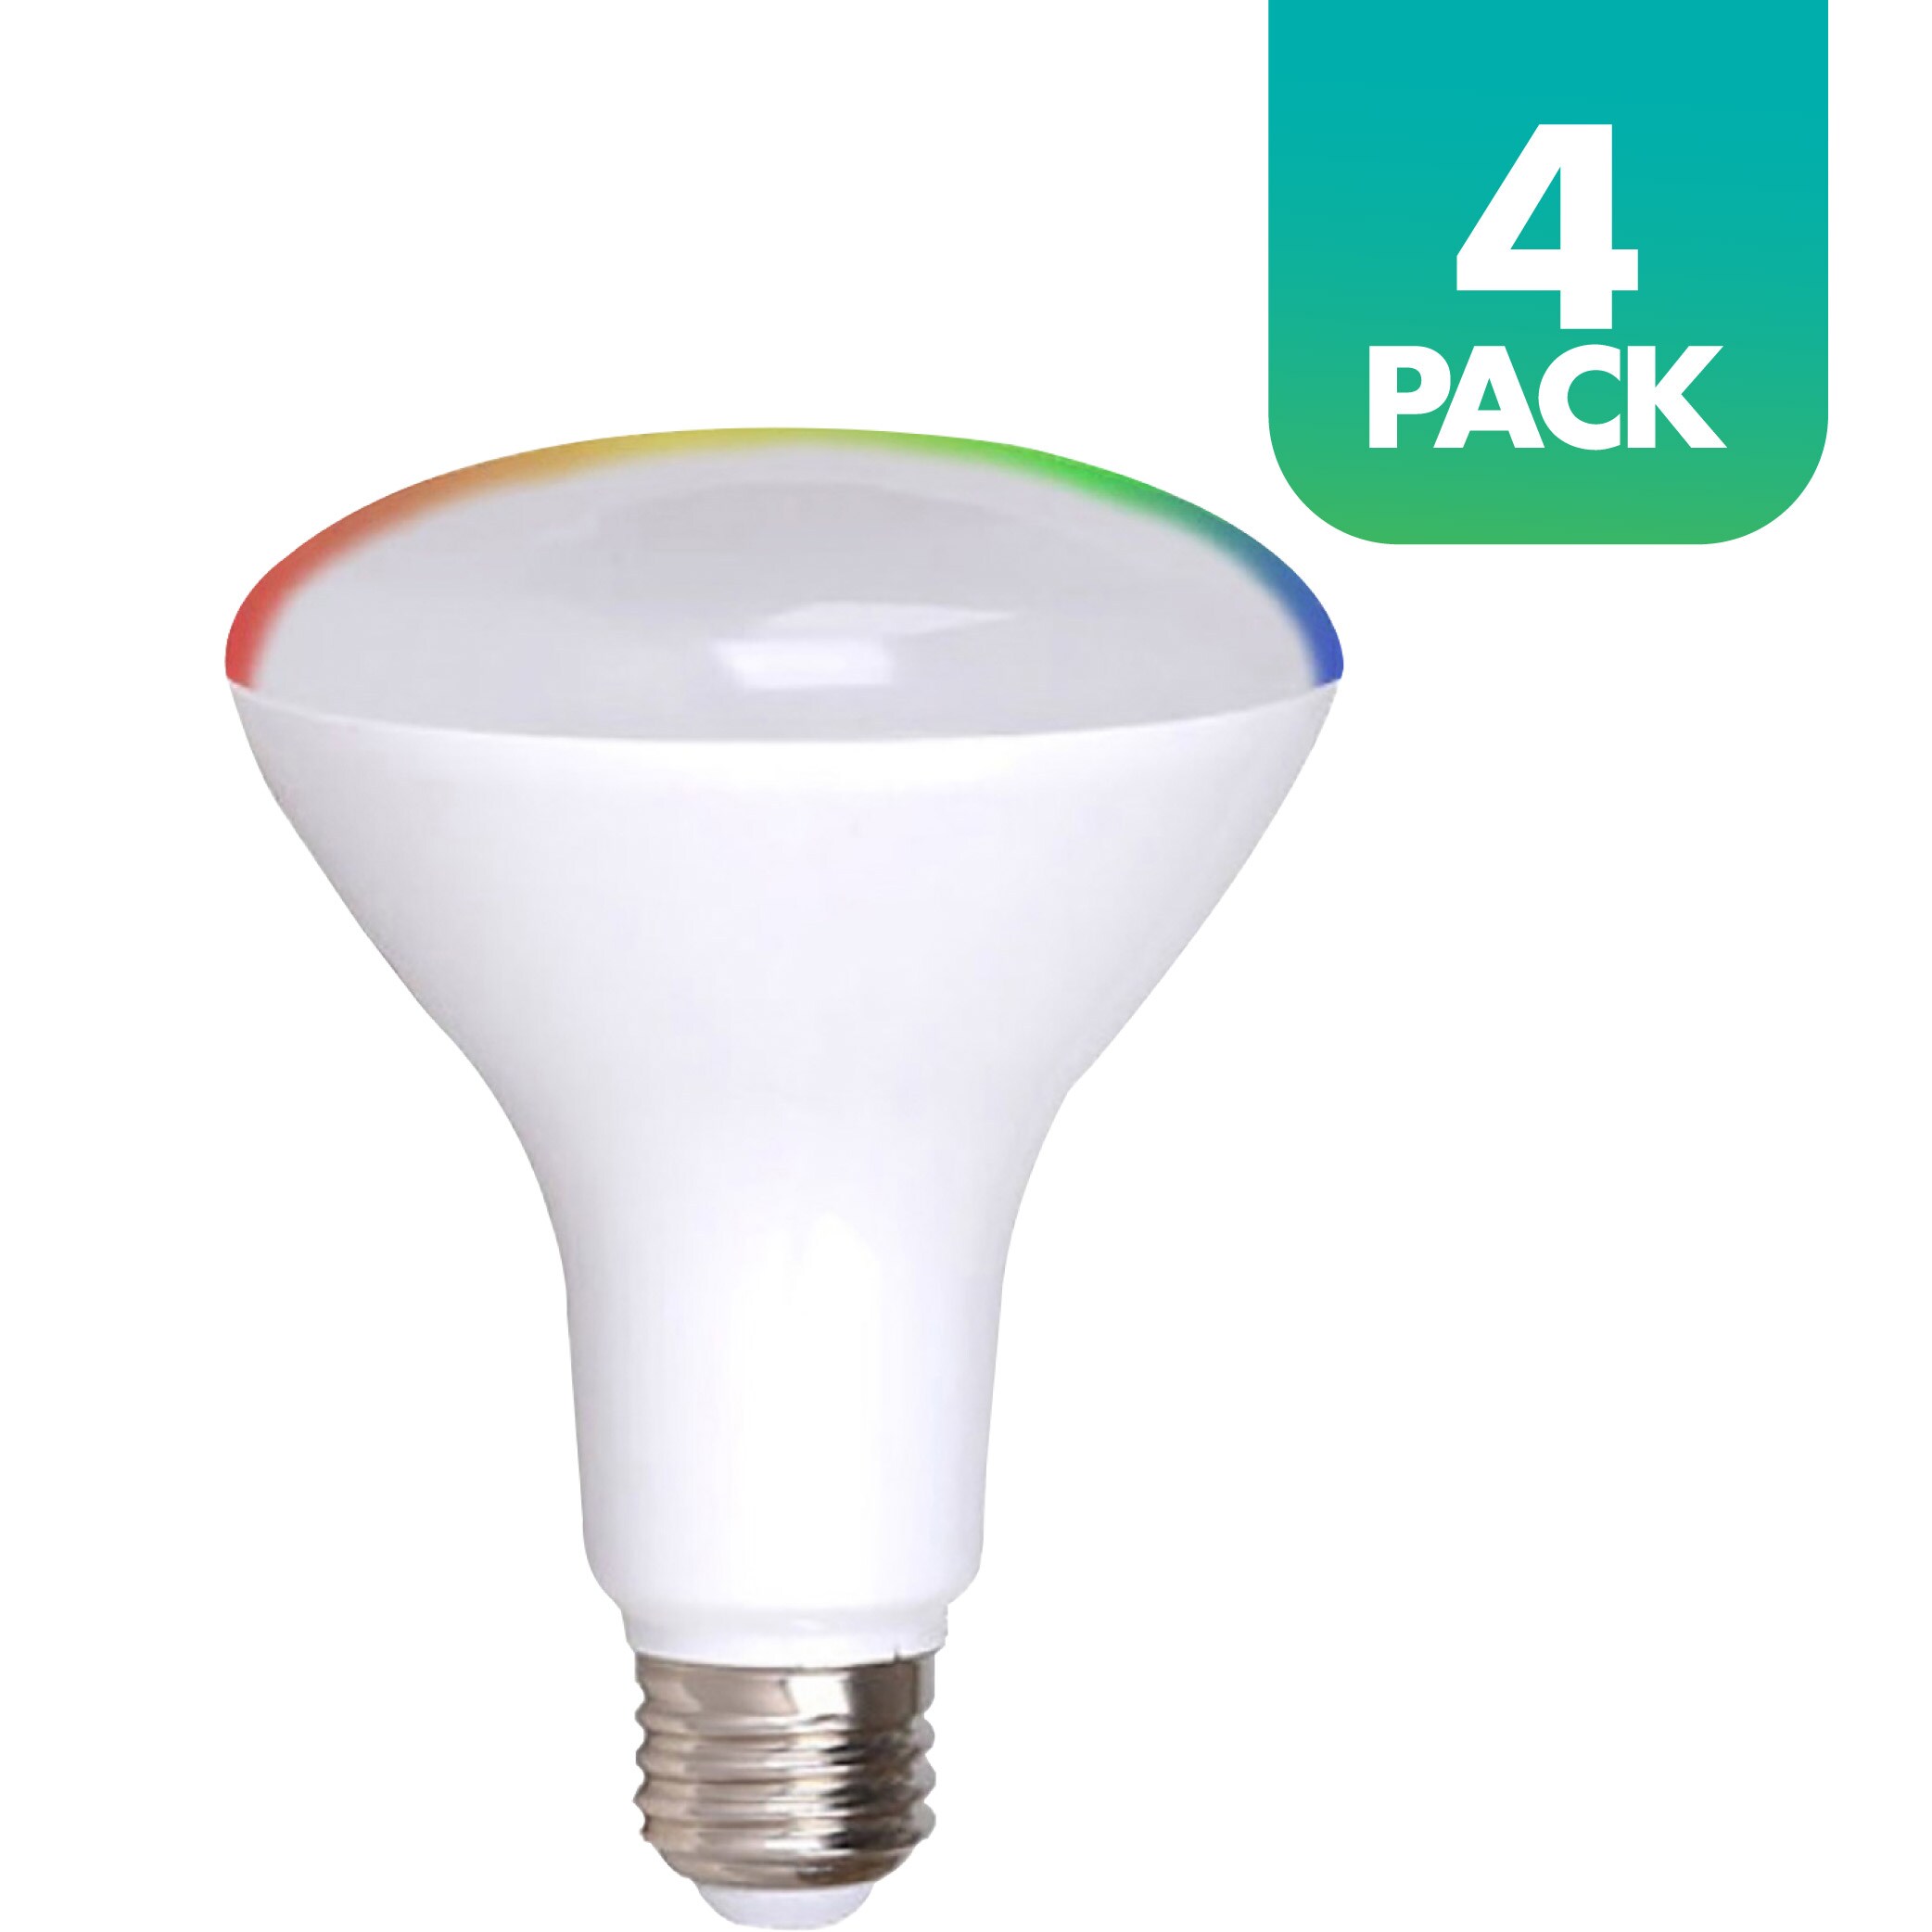 Proberen verwijzen Productief Simply Conserve ENERGY STAR Smart WiFi Bluetooth BR30 LED Lamp 65-Watt EQ  LED Br30 Color Changing Medium Base (e-26) Dimmable Smart Flood Light Bulb  (4-Pack) in the Spot & Flood LED Light